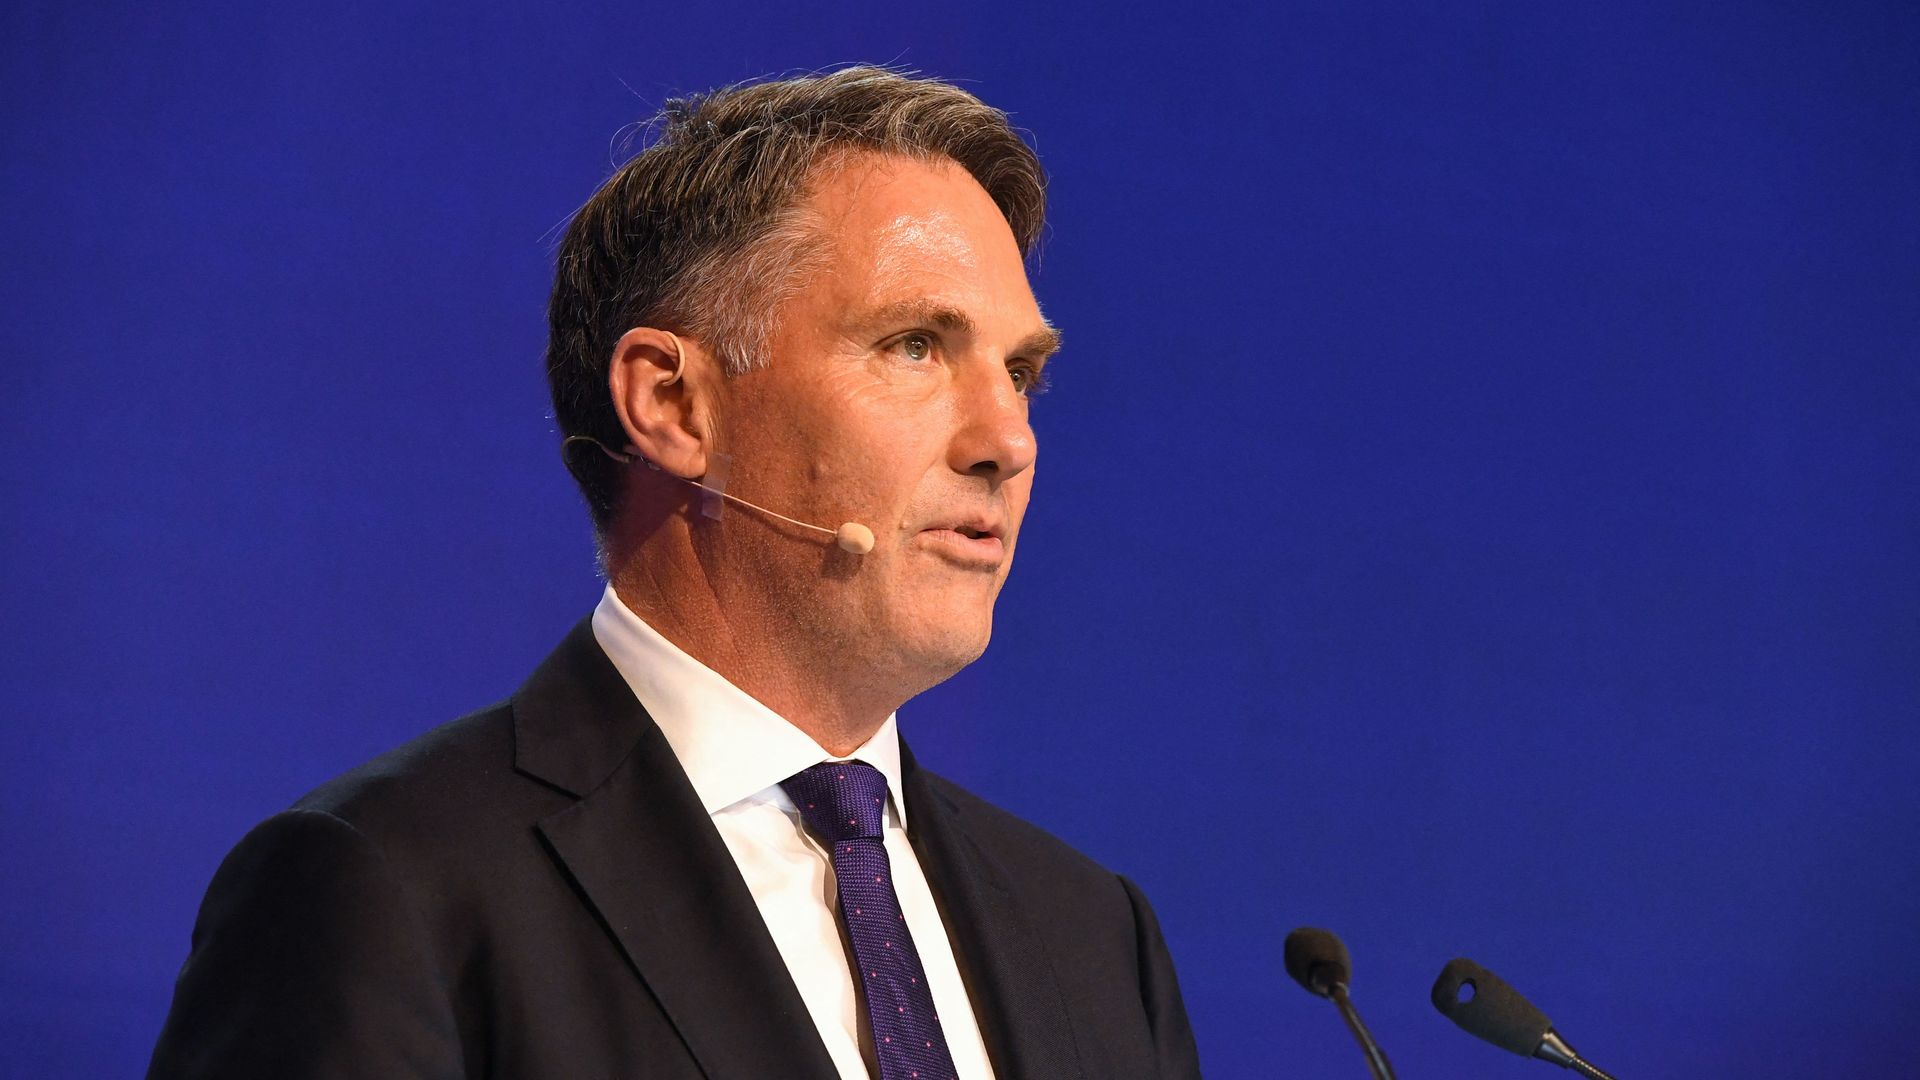 Australia's Deputy Prime Minister and Minister of Defence Richard Marles speaks at the Shangri-La Dialogue summit in Singapore on June 11, 2022